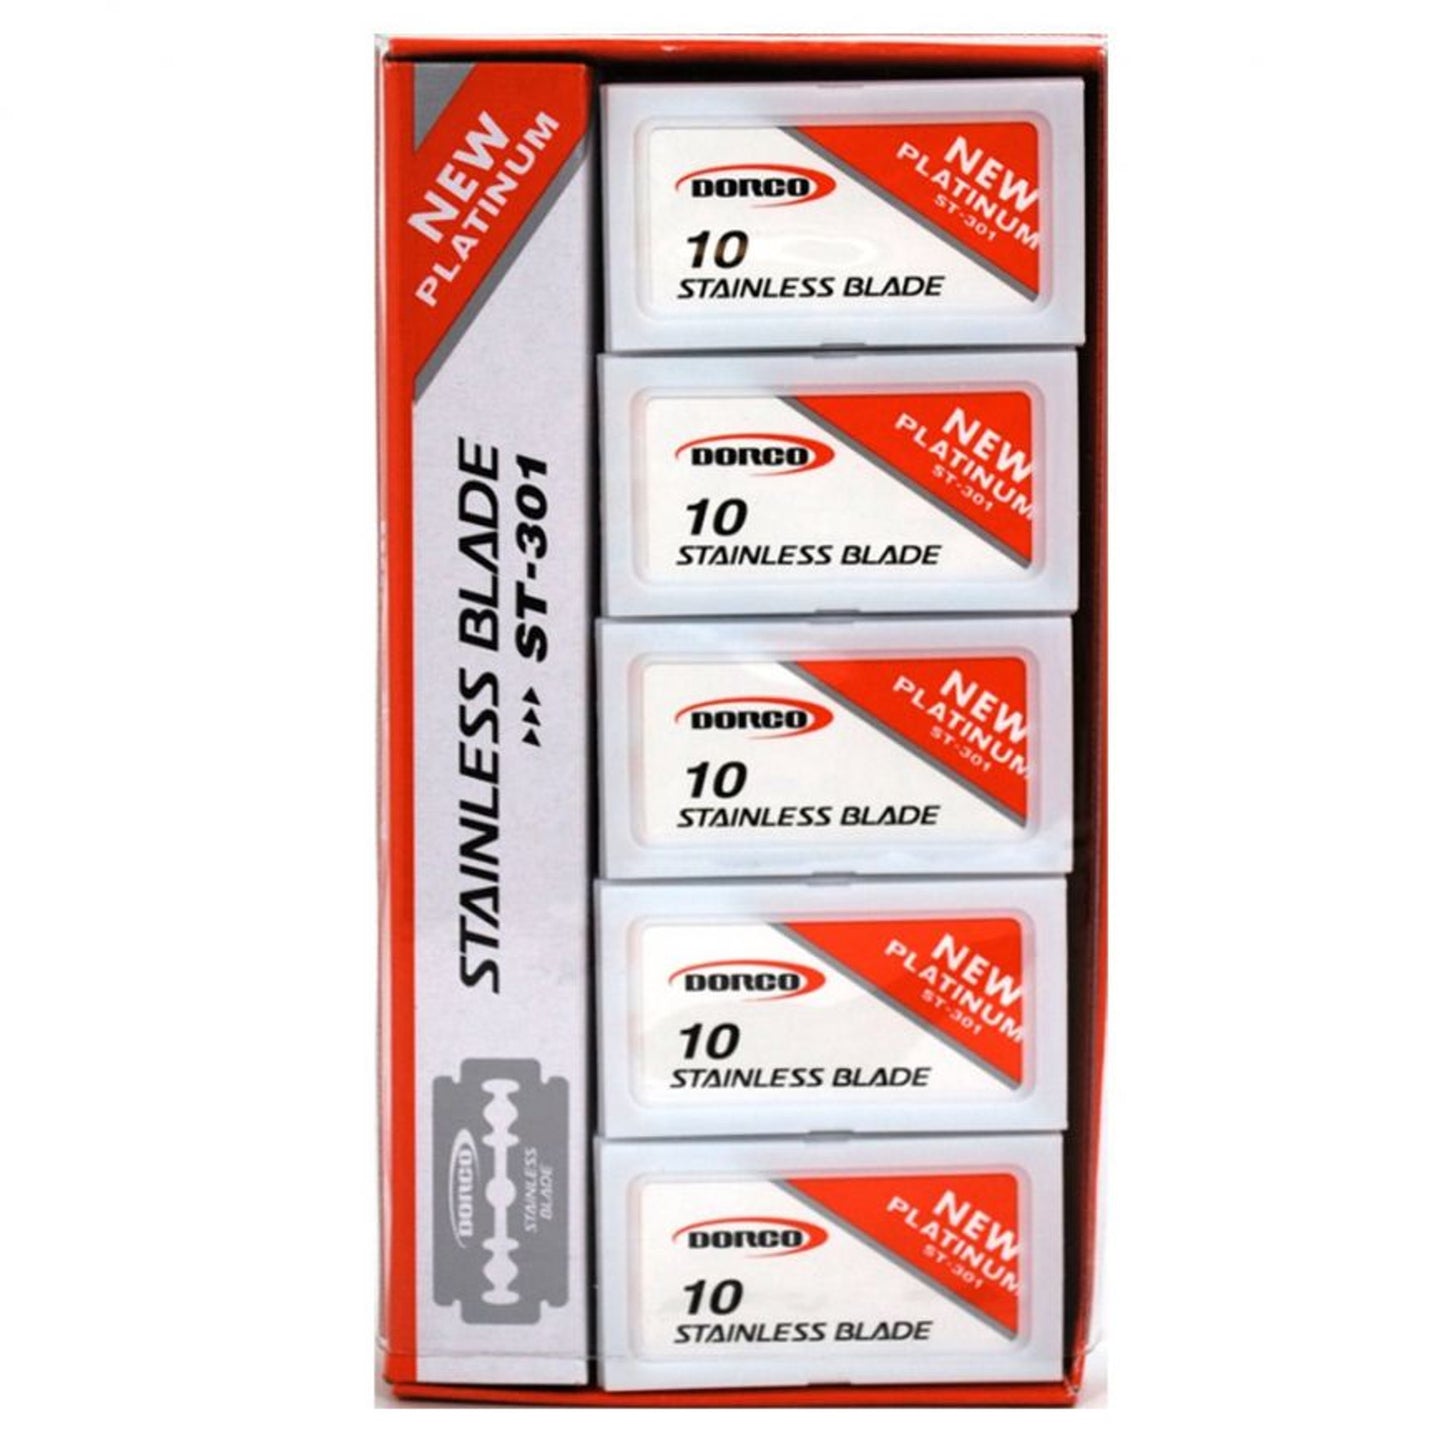 Dorco Stainless Steel Blade ST301 - 100ct